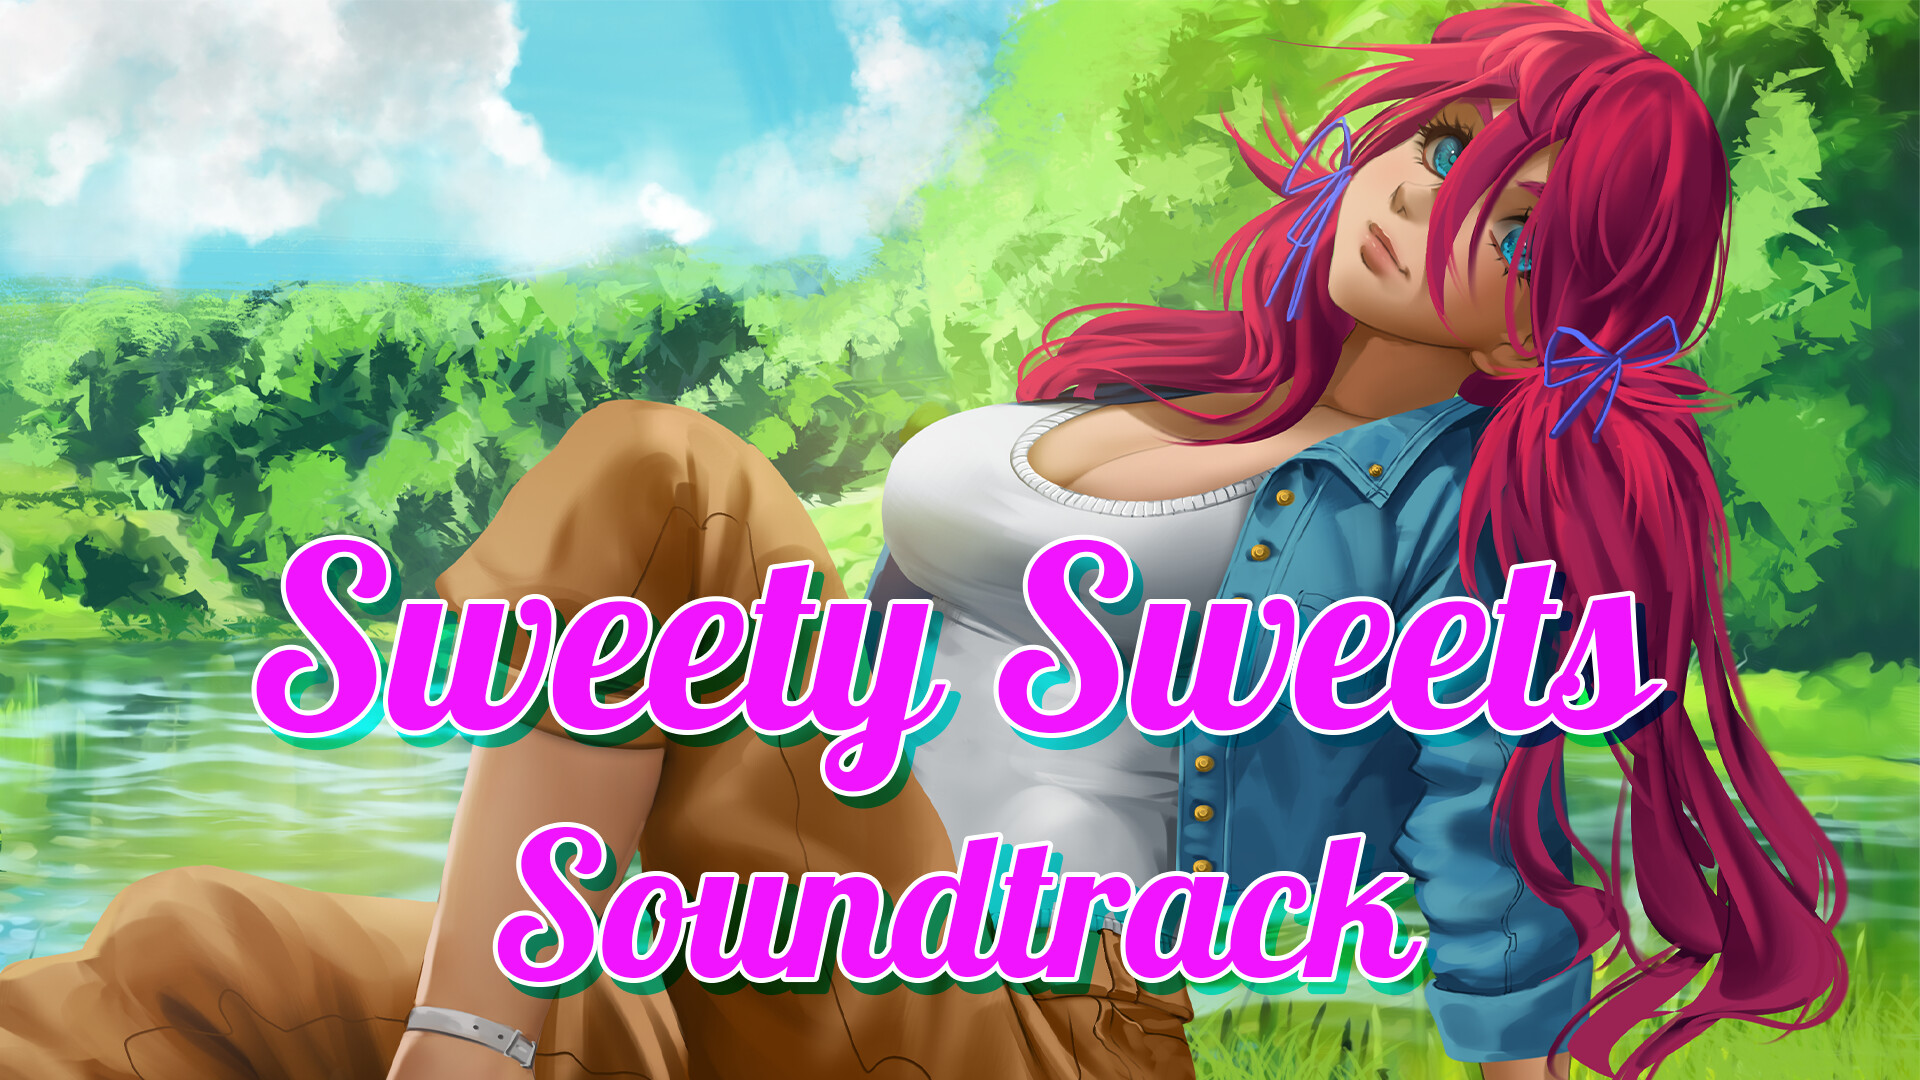 Sweety Sweets Soundtrack Featured Screenshot #1